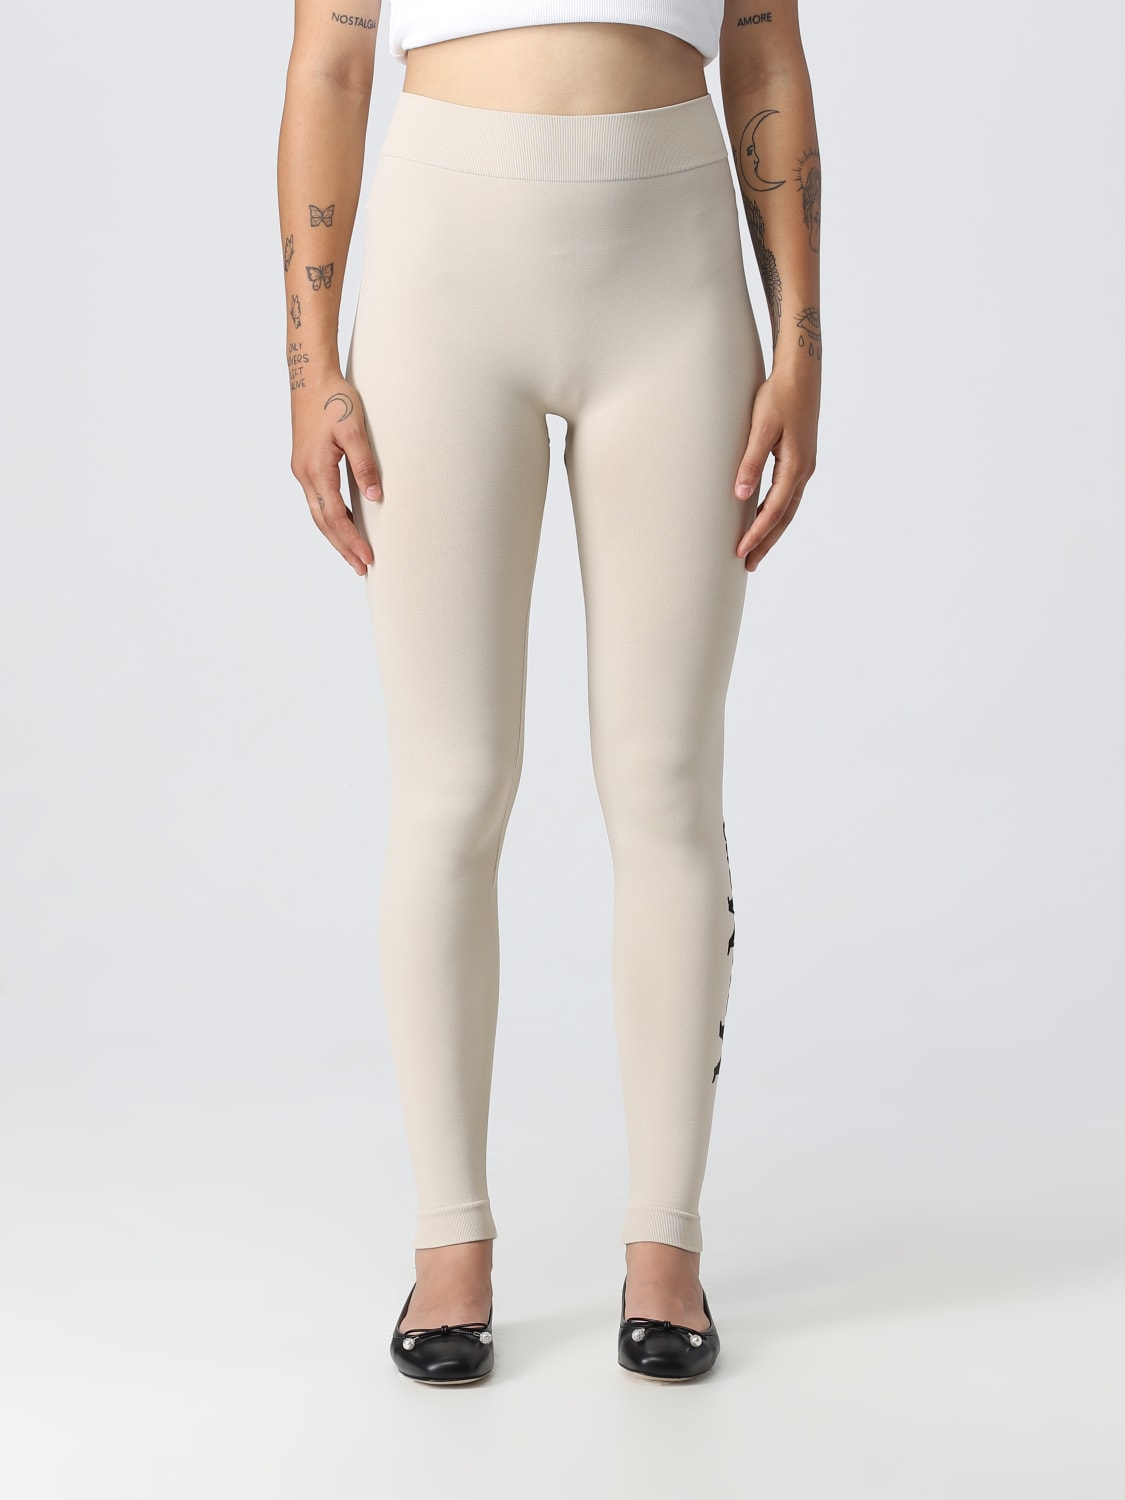 Leggings Max Mara White size XL International in Not specified